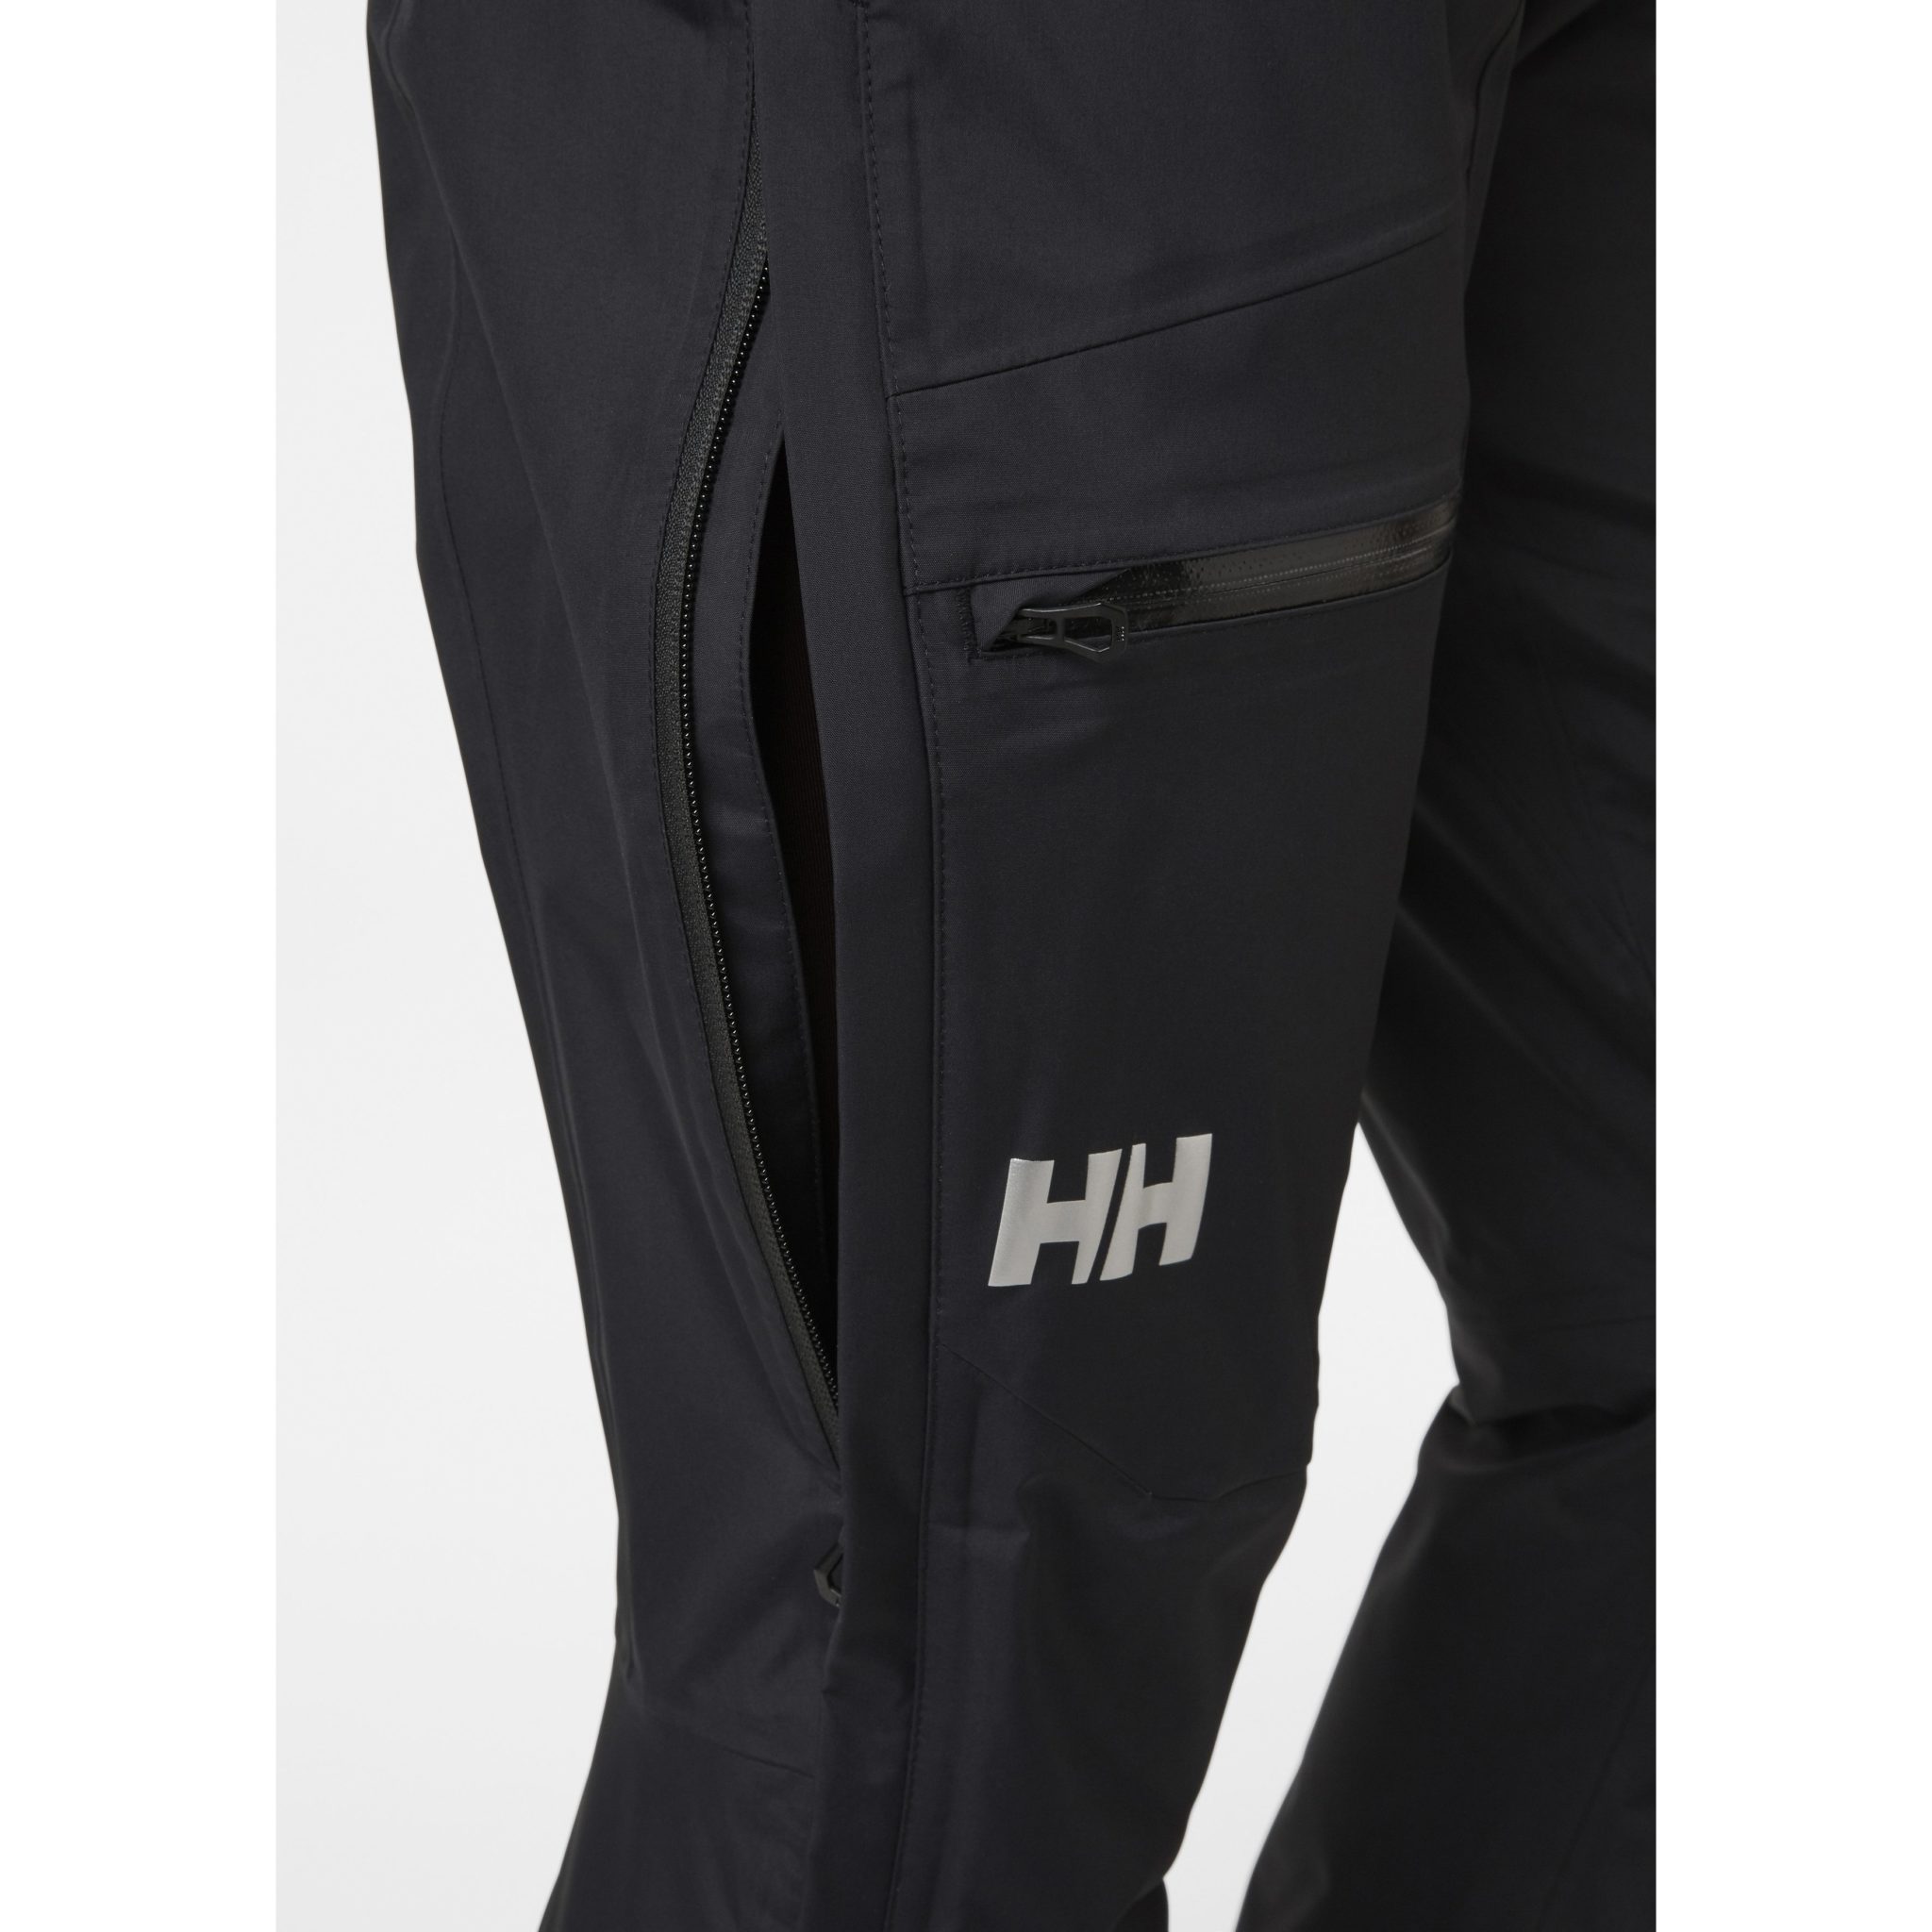 Helly Hansen Womens Verglas 3L Shell Pant | Big Weather Gear | Helly ...